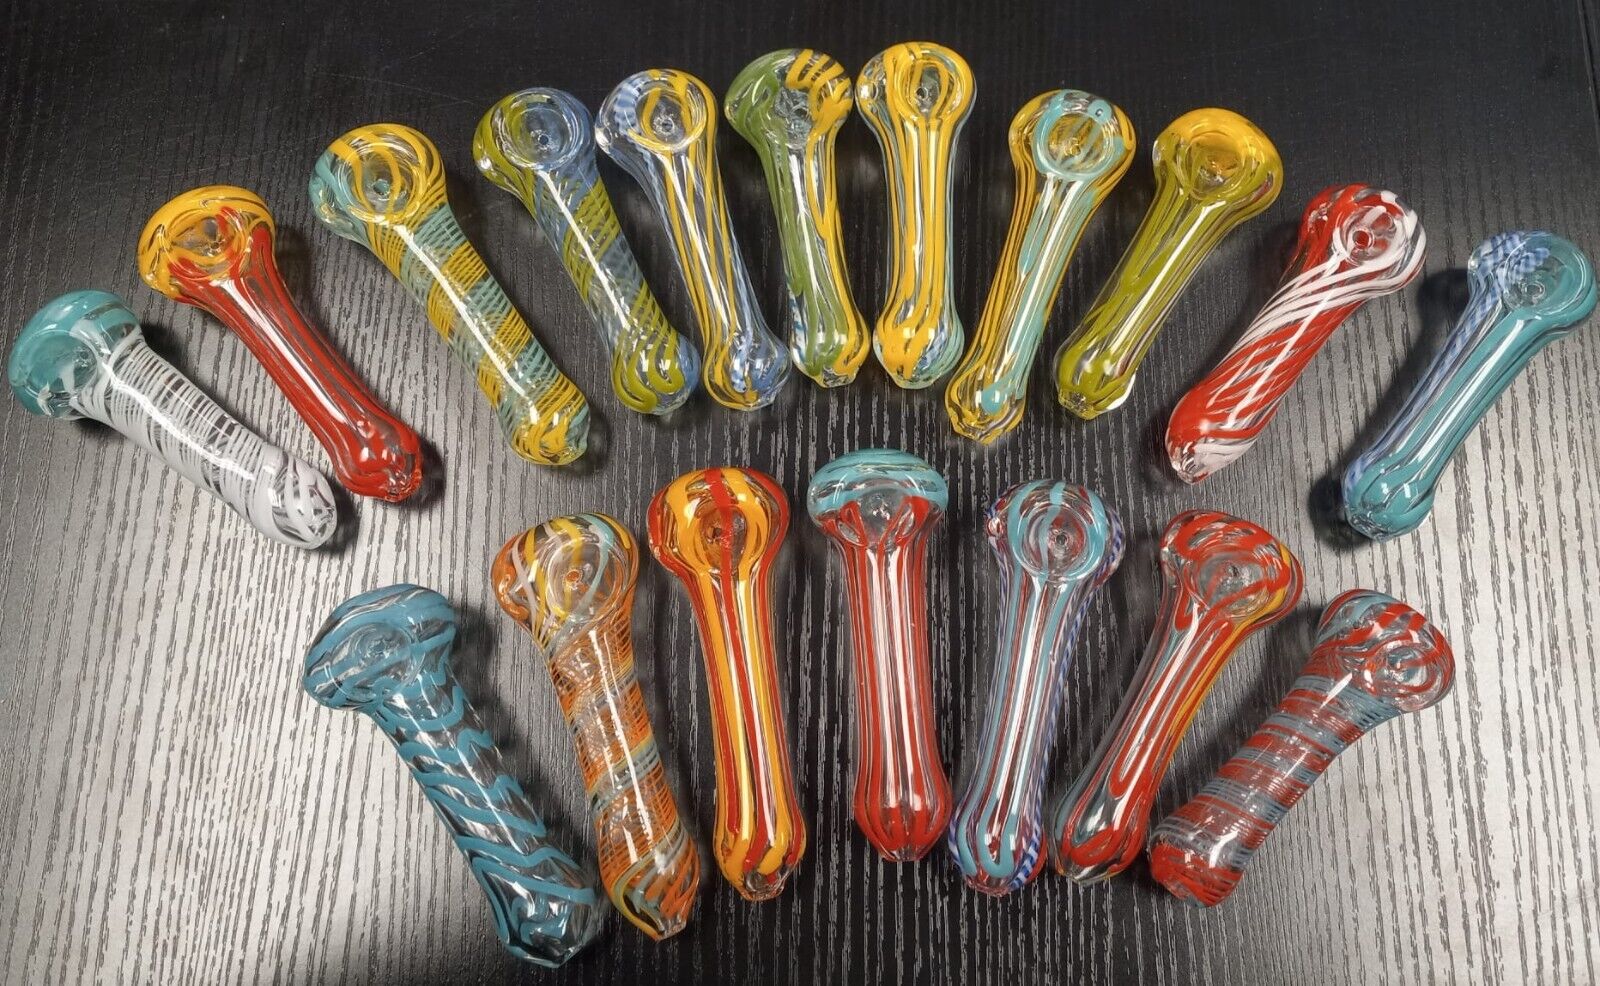 😎BUY ONE GET ONE FREE✨🔥GLASS HAND PIPES WITH COLORFUL DESIGN✨RANDOM COLOR